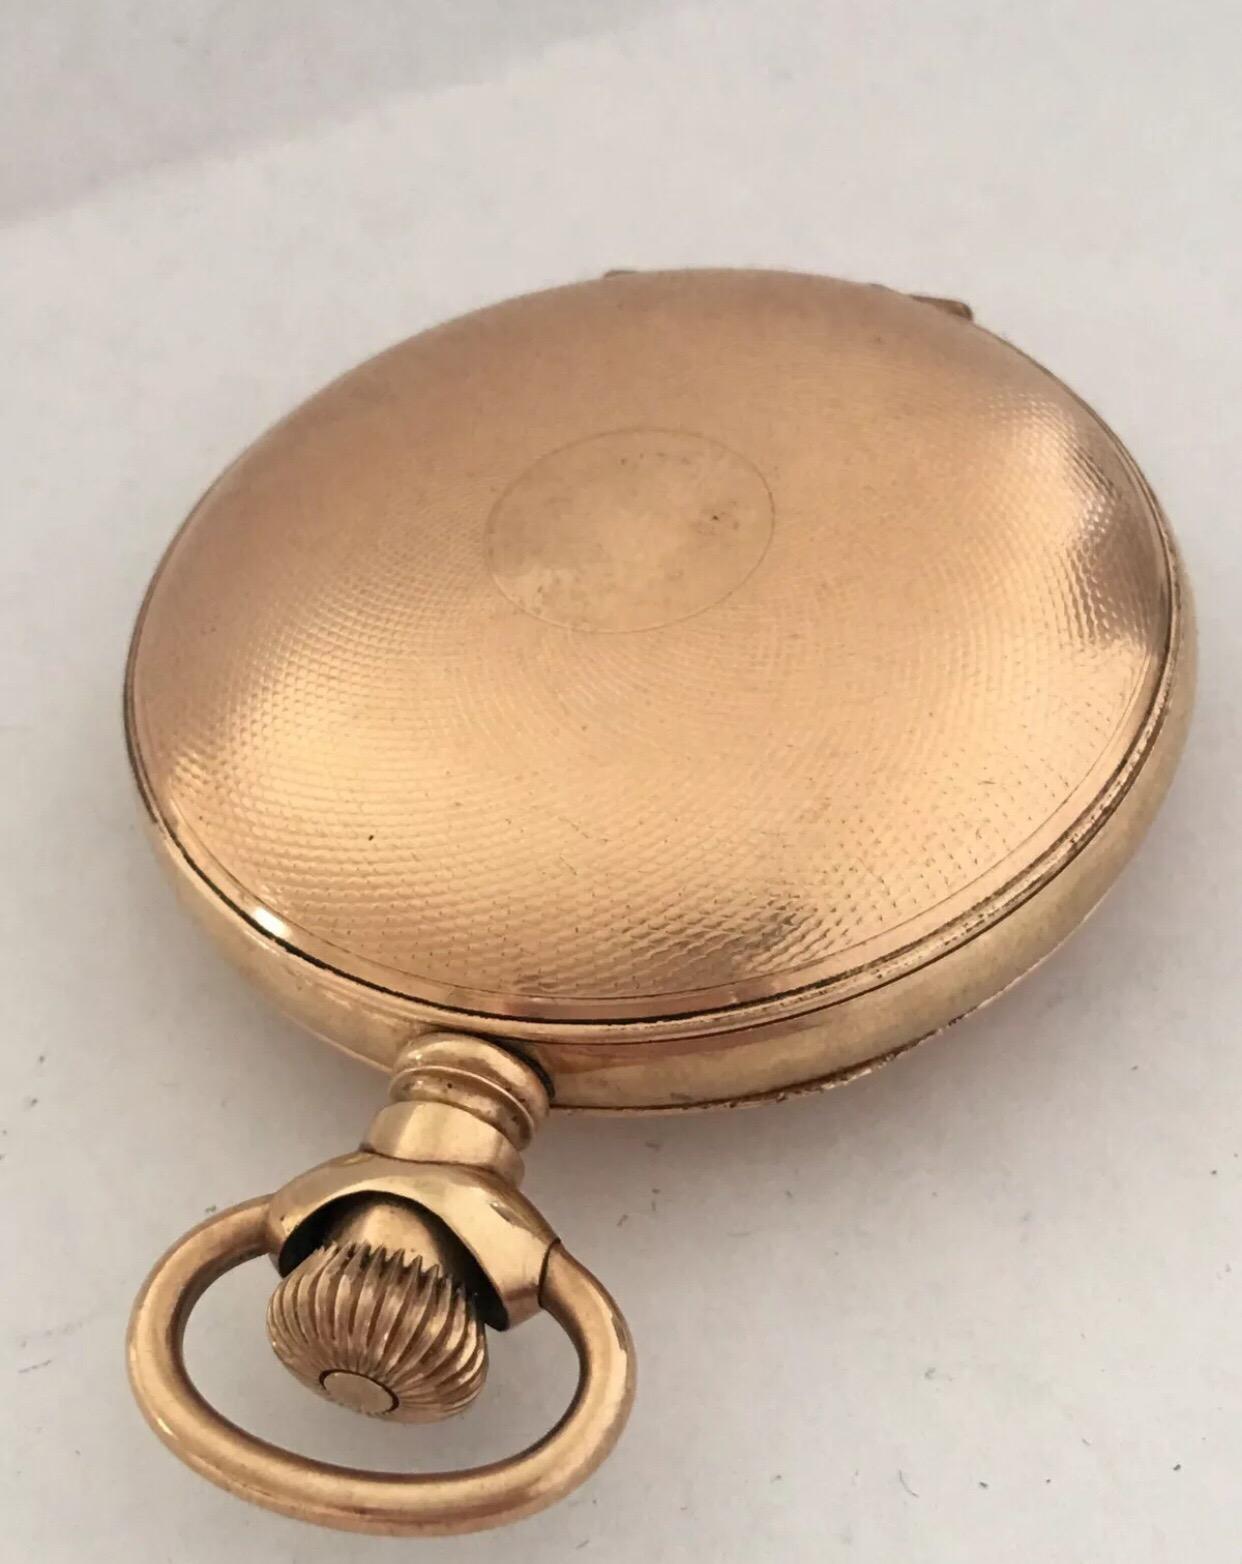 Antique Gold-Plated Full Hunter Cased Pocket Watch Signed Illinois Watch Case Co In Fair Condition For Sale In Carlisle, GB